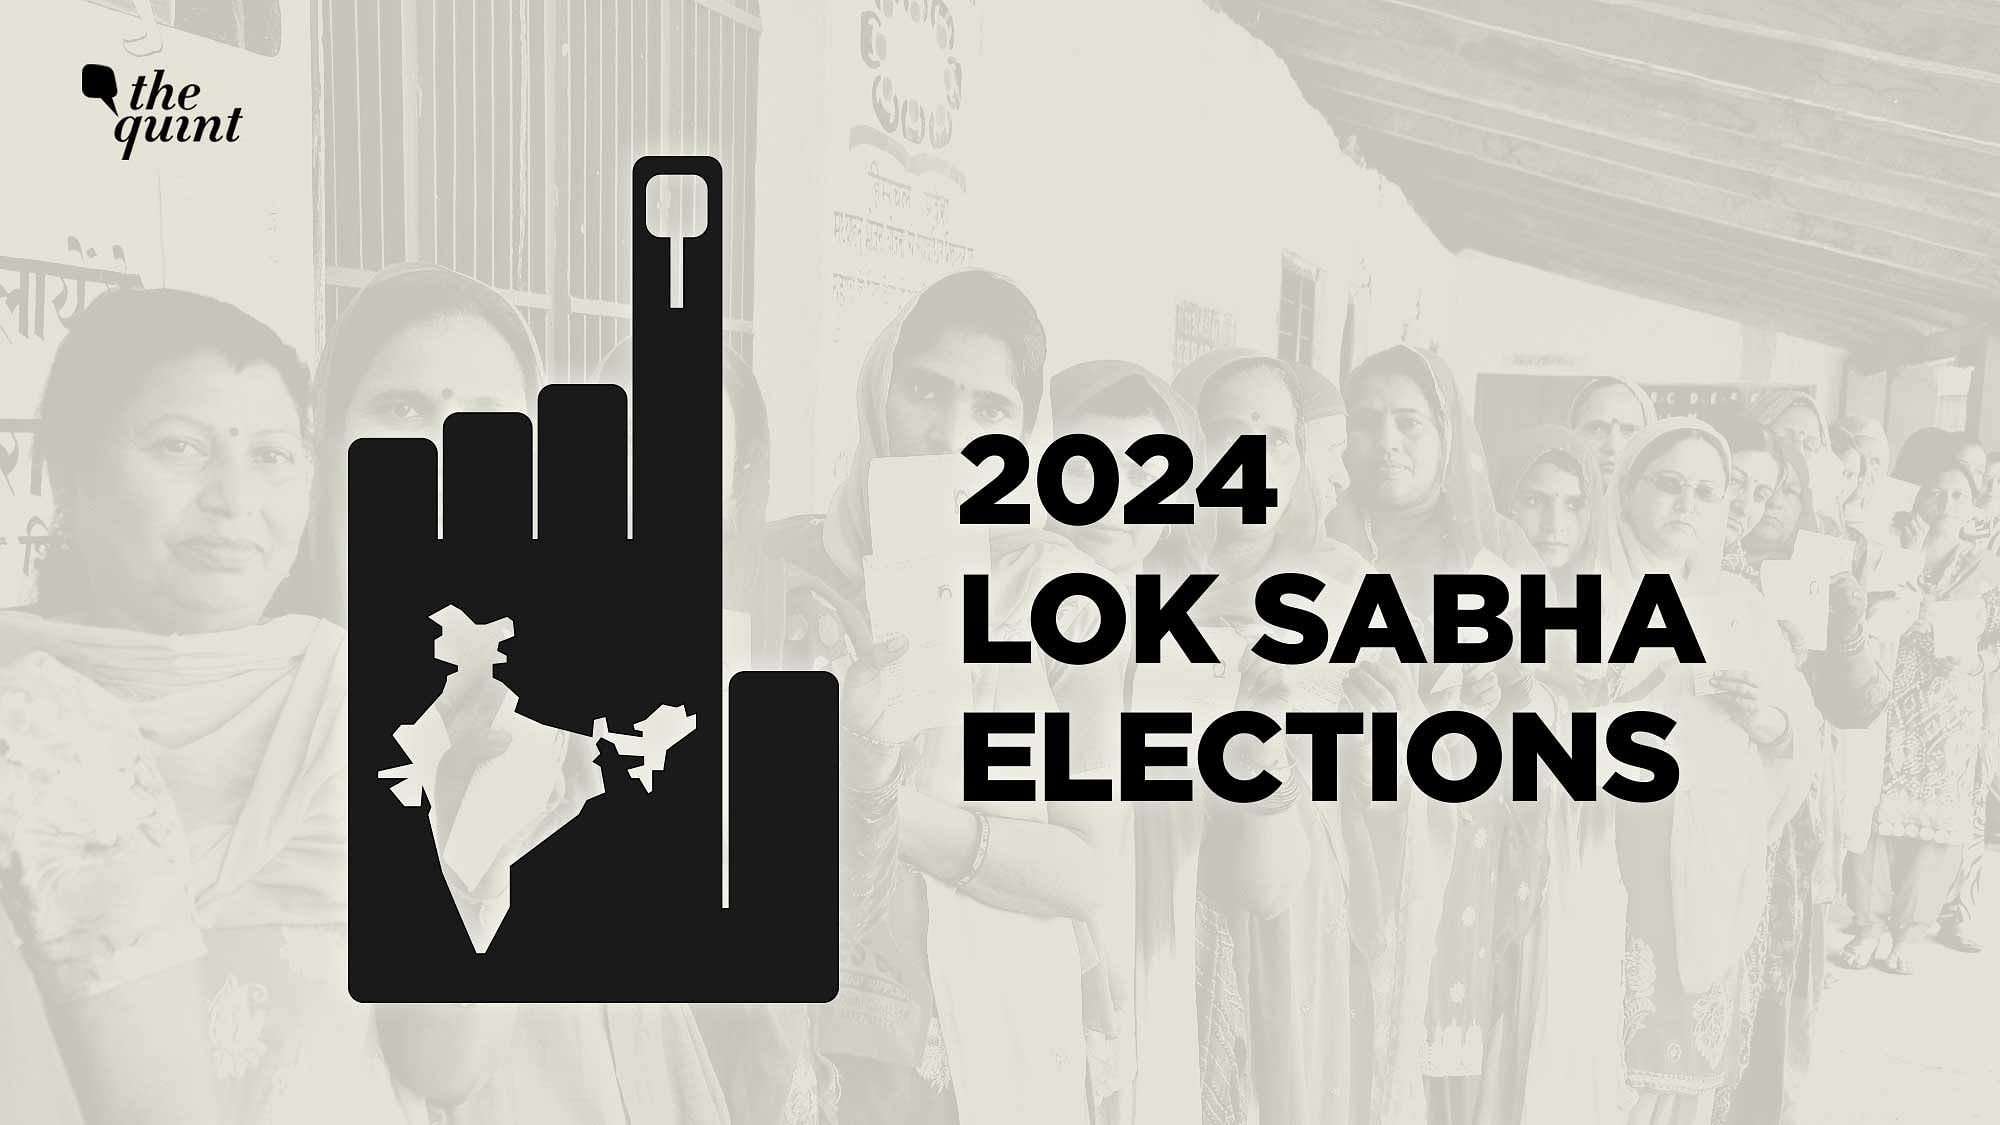 Lok Sabha Election 2024 Dates Elections To Be Held From 19 April to 1 June